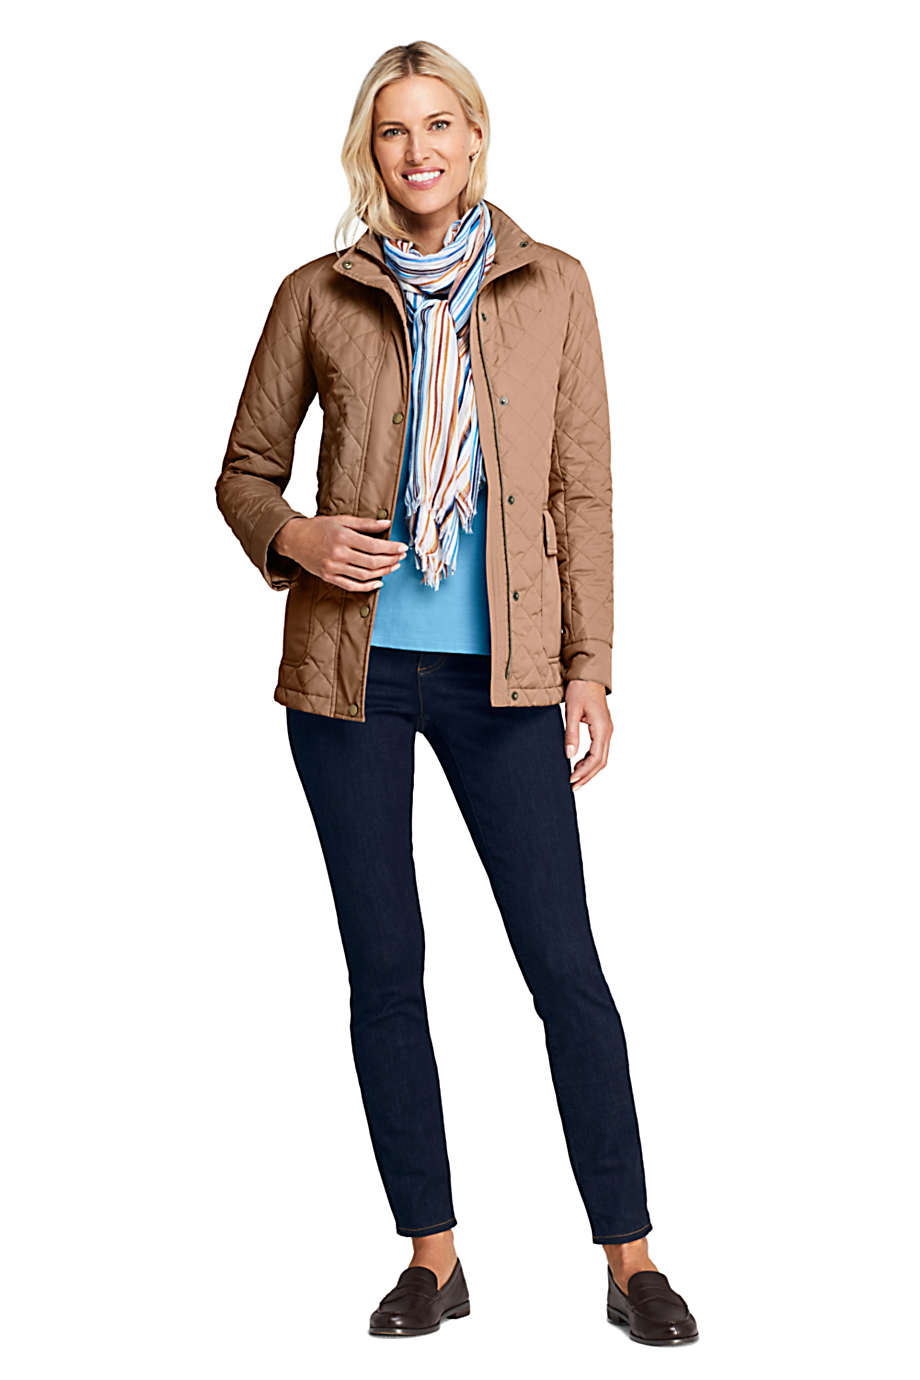 Lands' End Women's Packable Insulated Quilted Barn Long Jacket